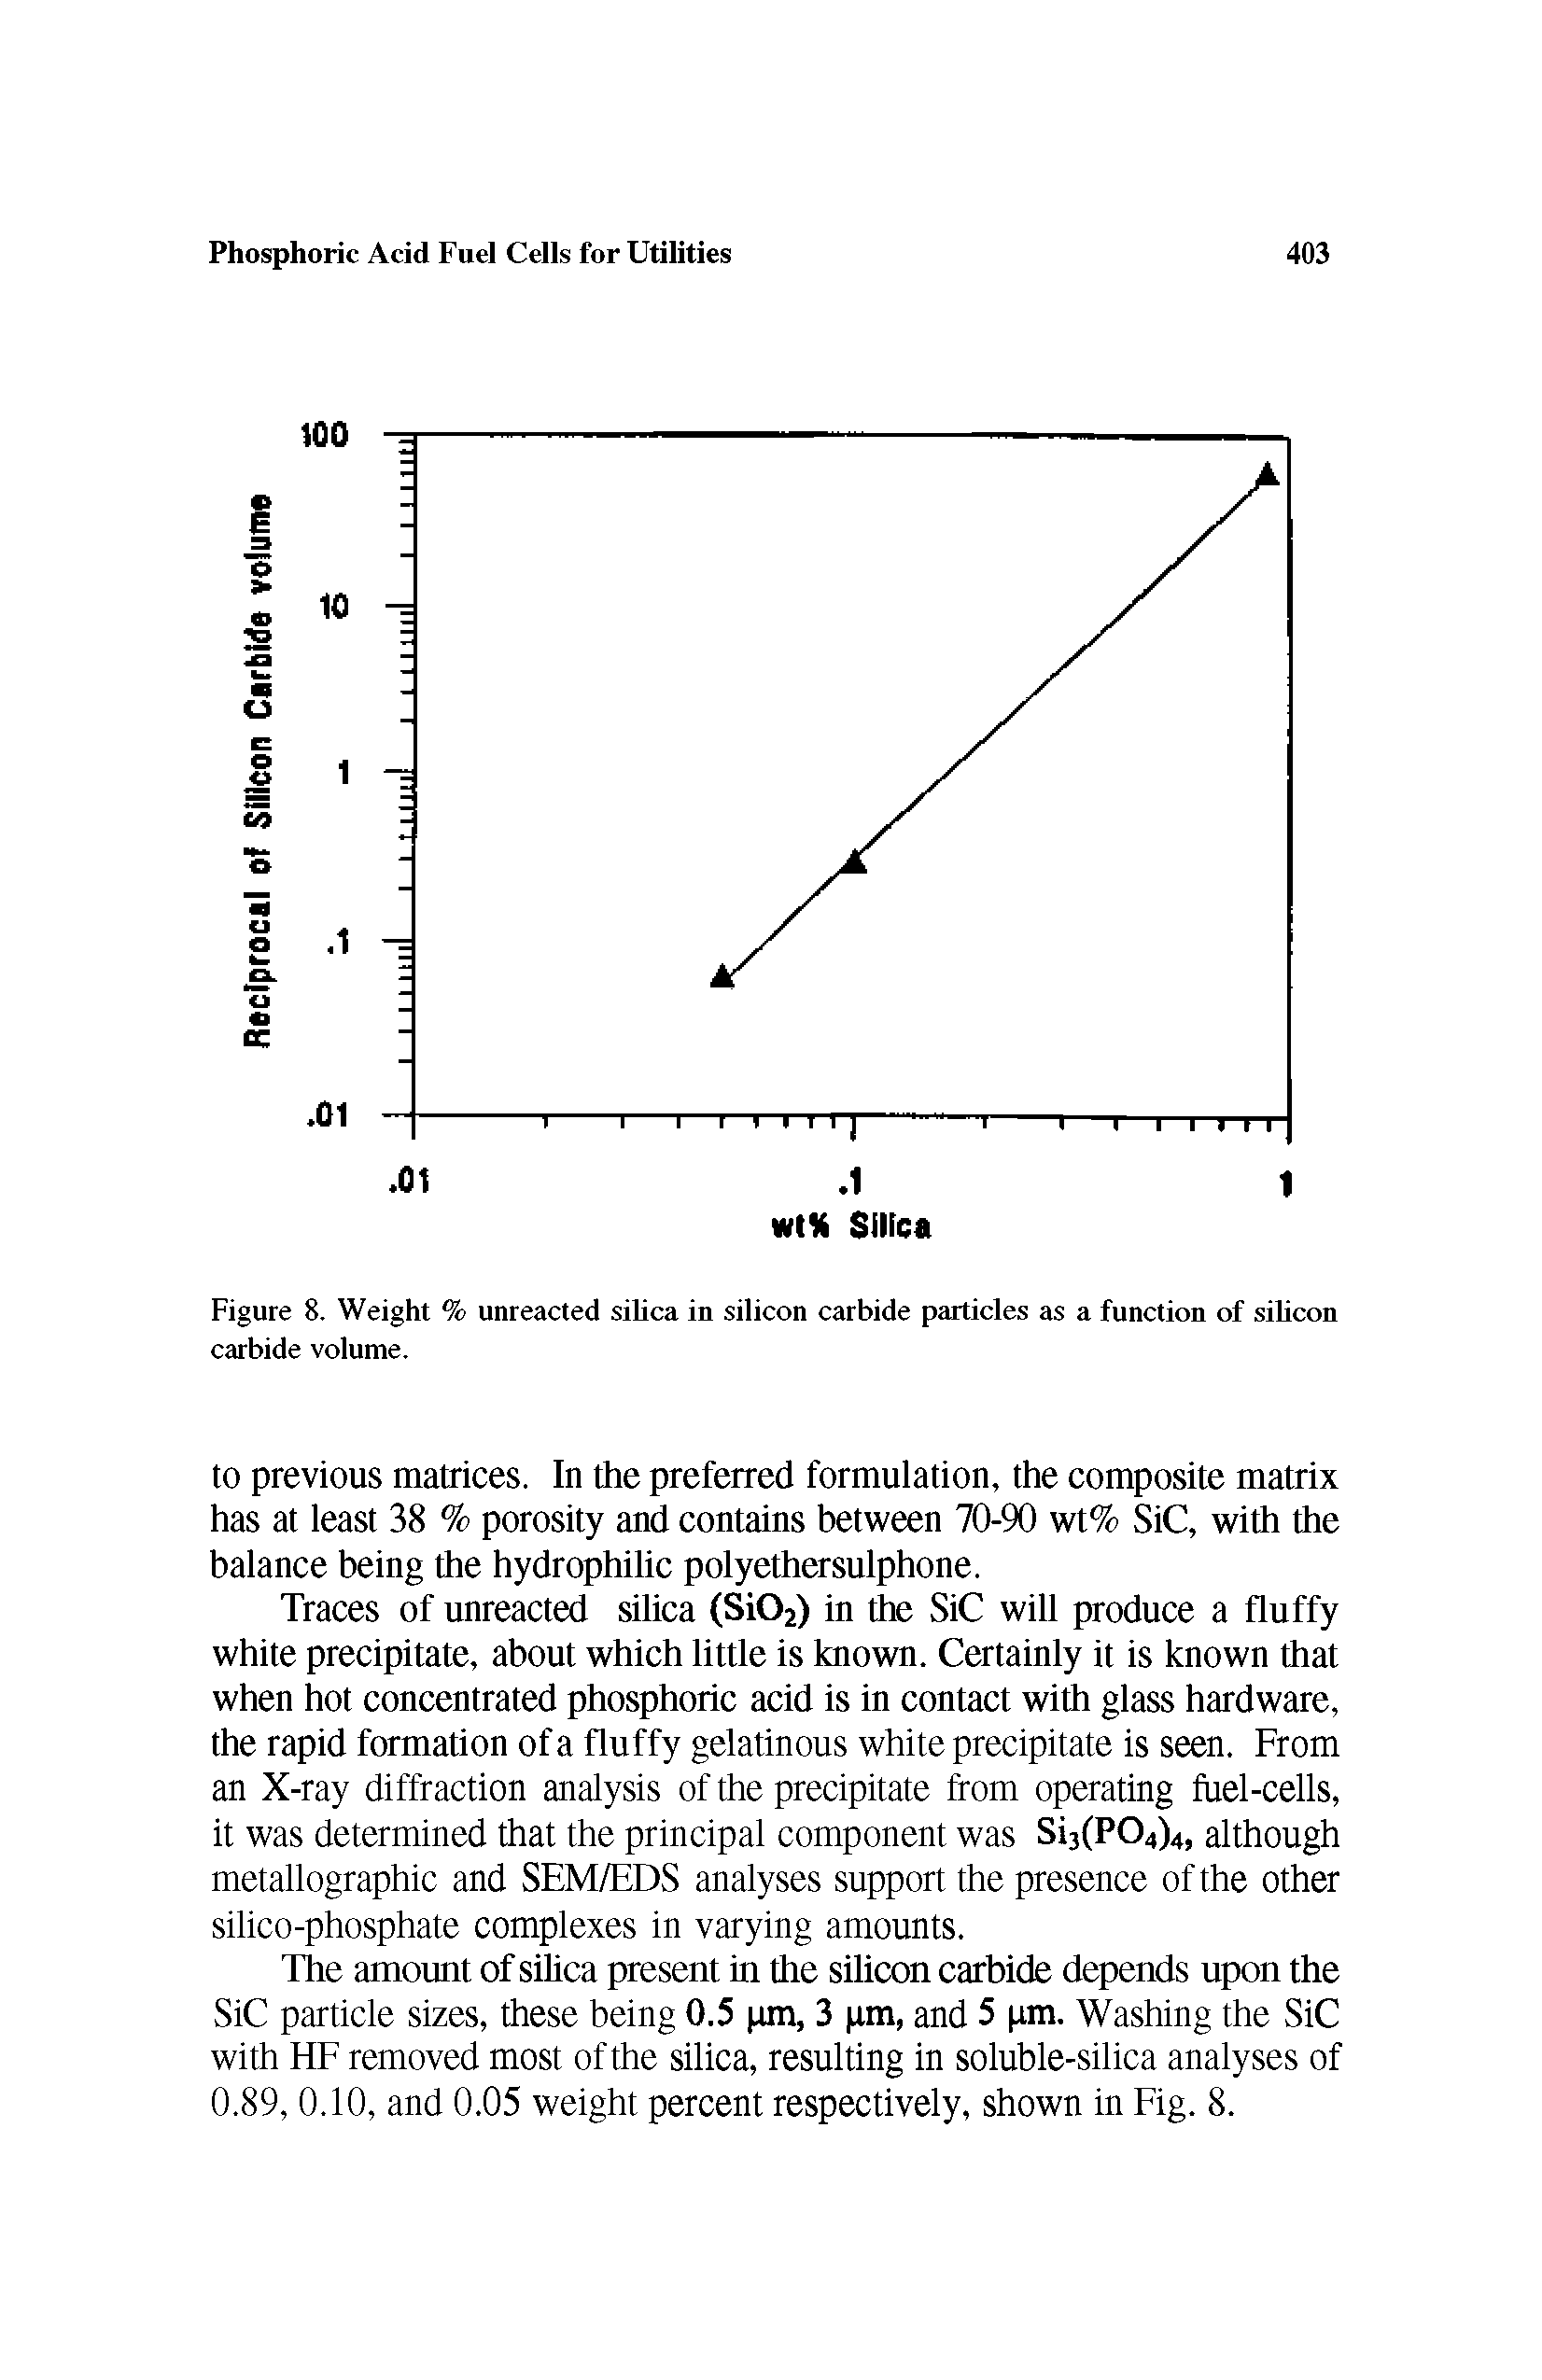 Figure 8. Weight % unreacted silica in silicon carbide particles as a function of silicon carbide volume.